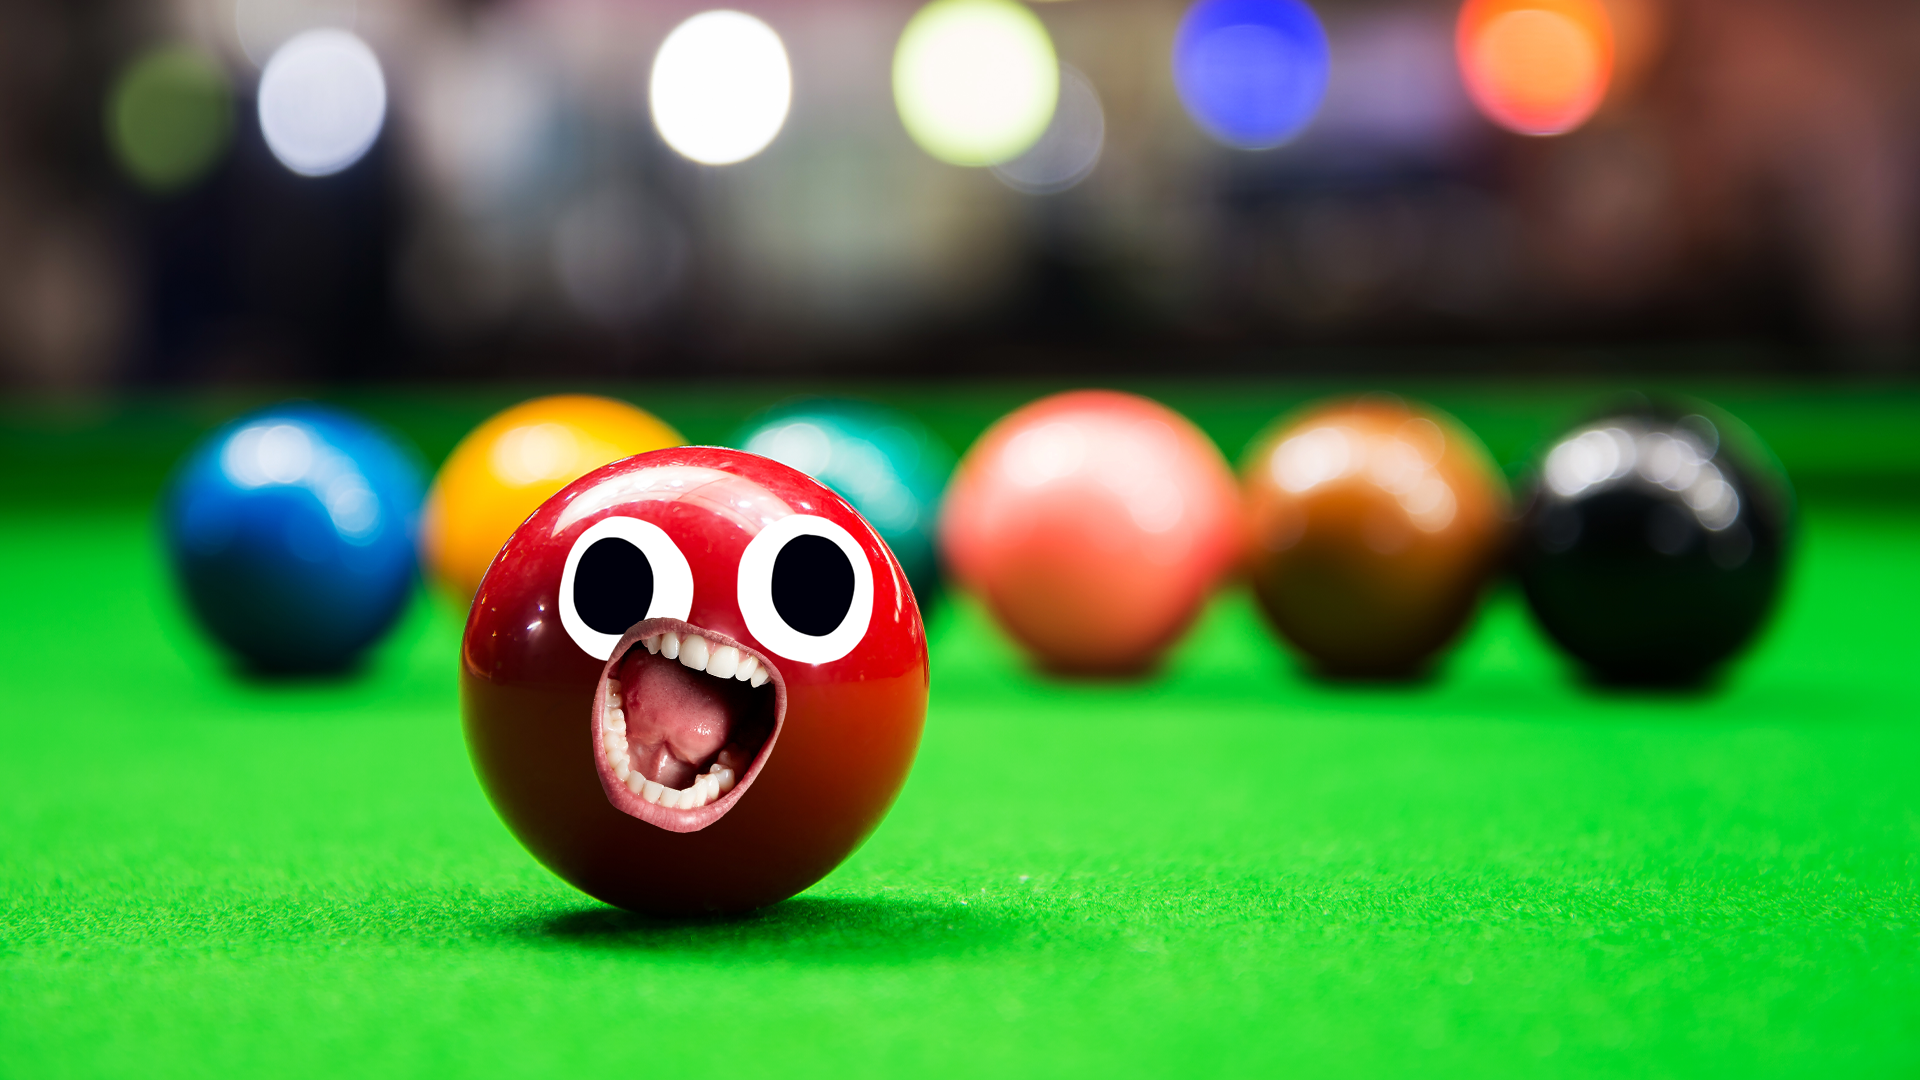 Snooker ball with a goofy face